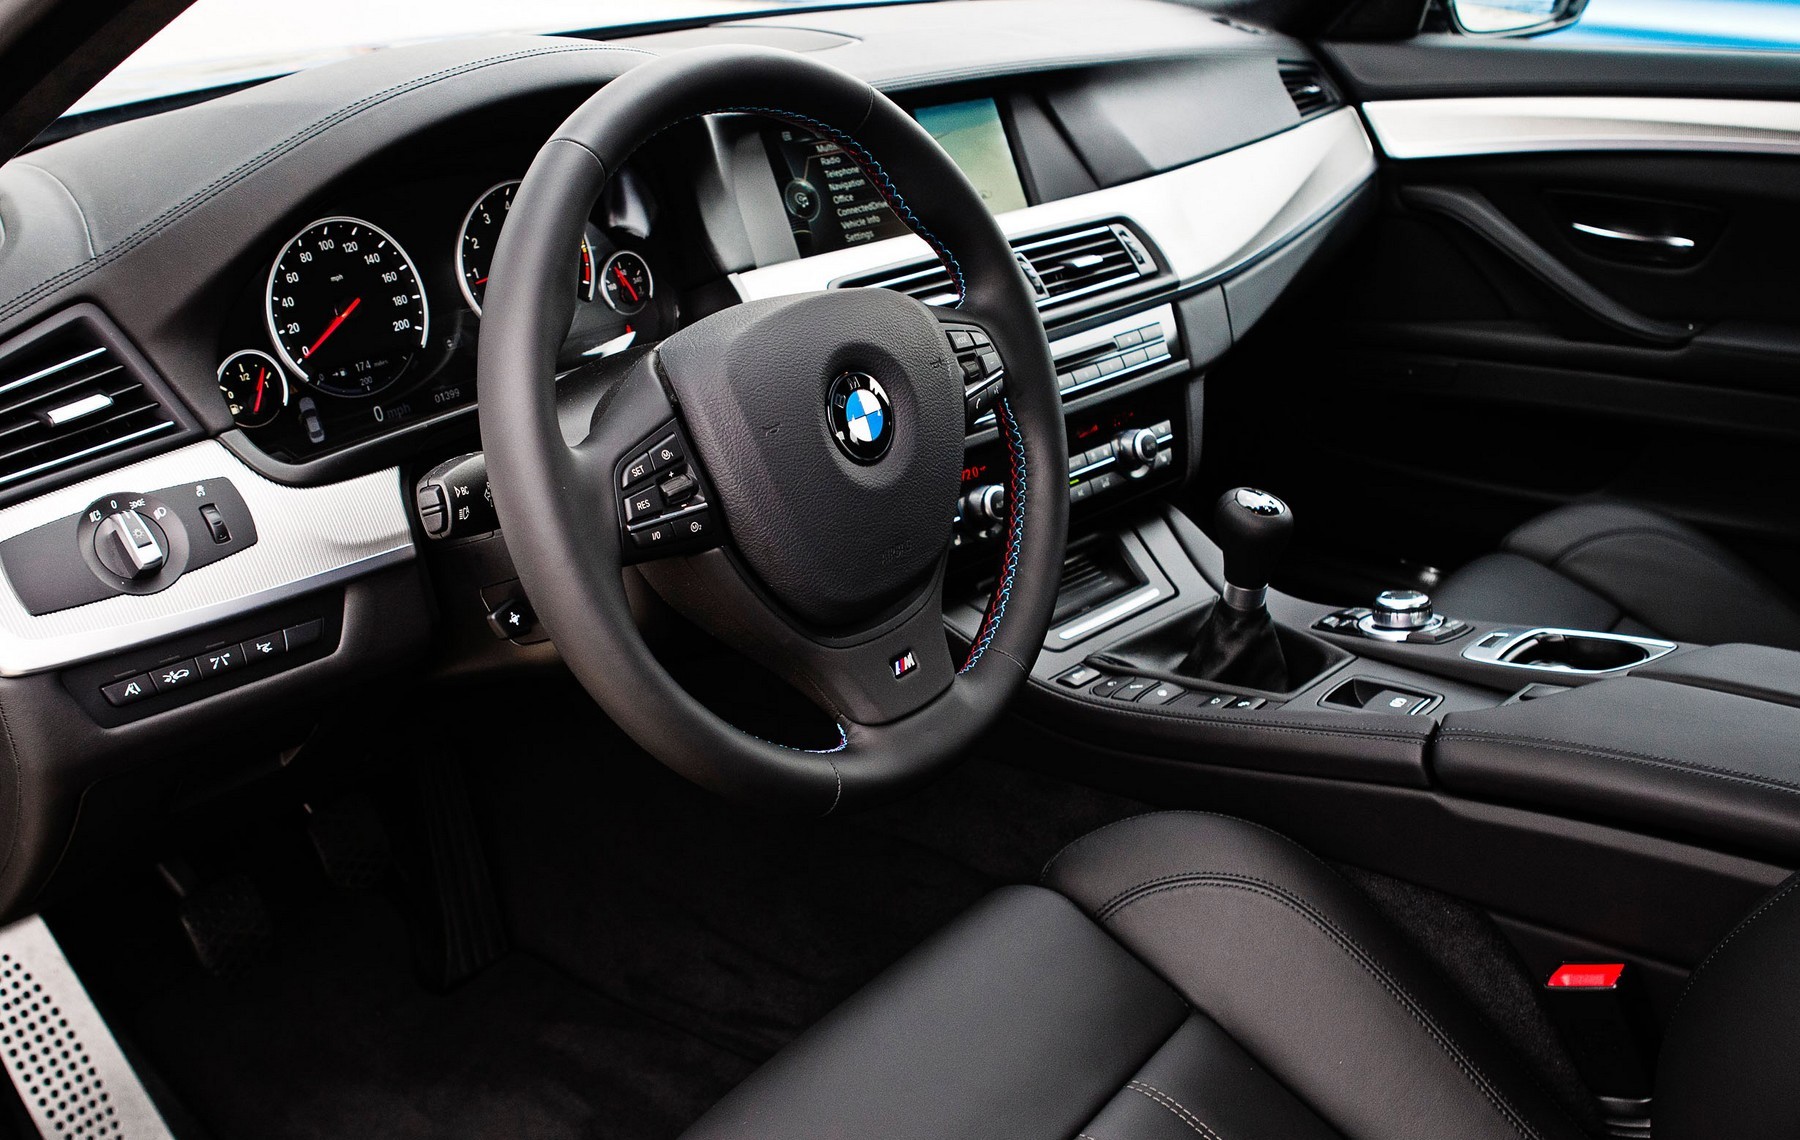 The 2013 BMW M5 and M6 mix business and pleasure: Motoramic Drives